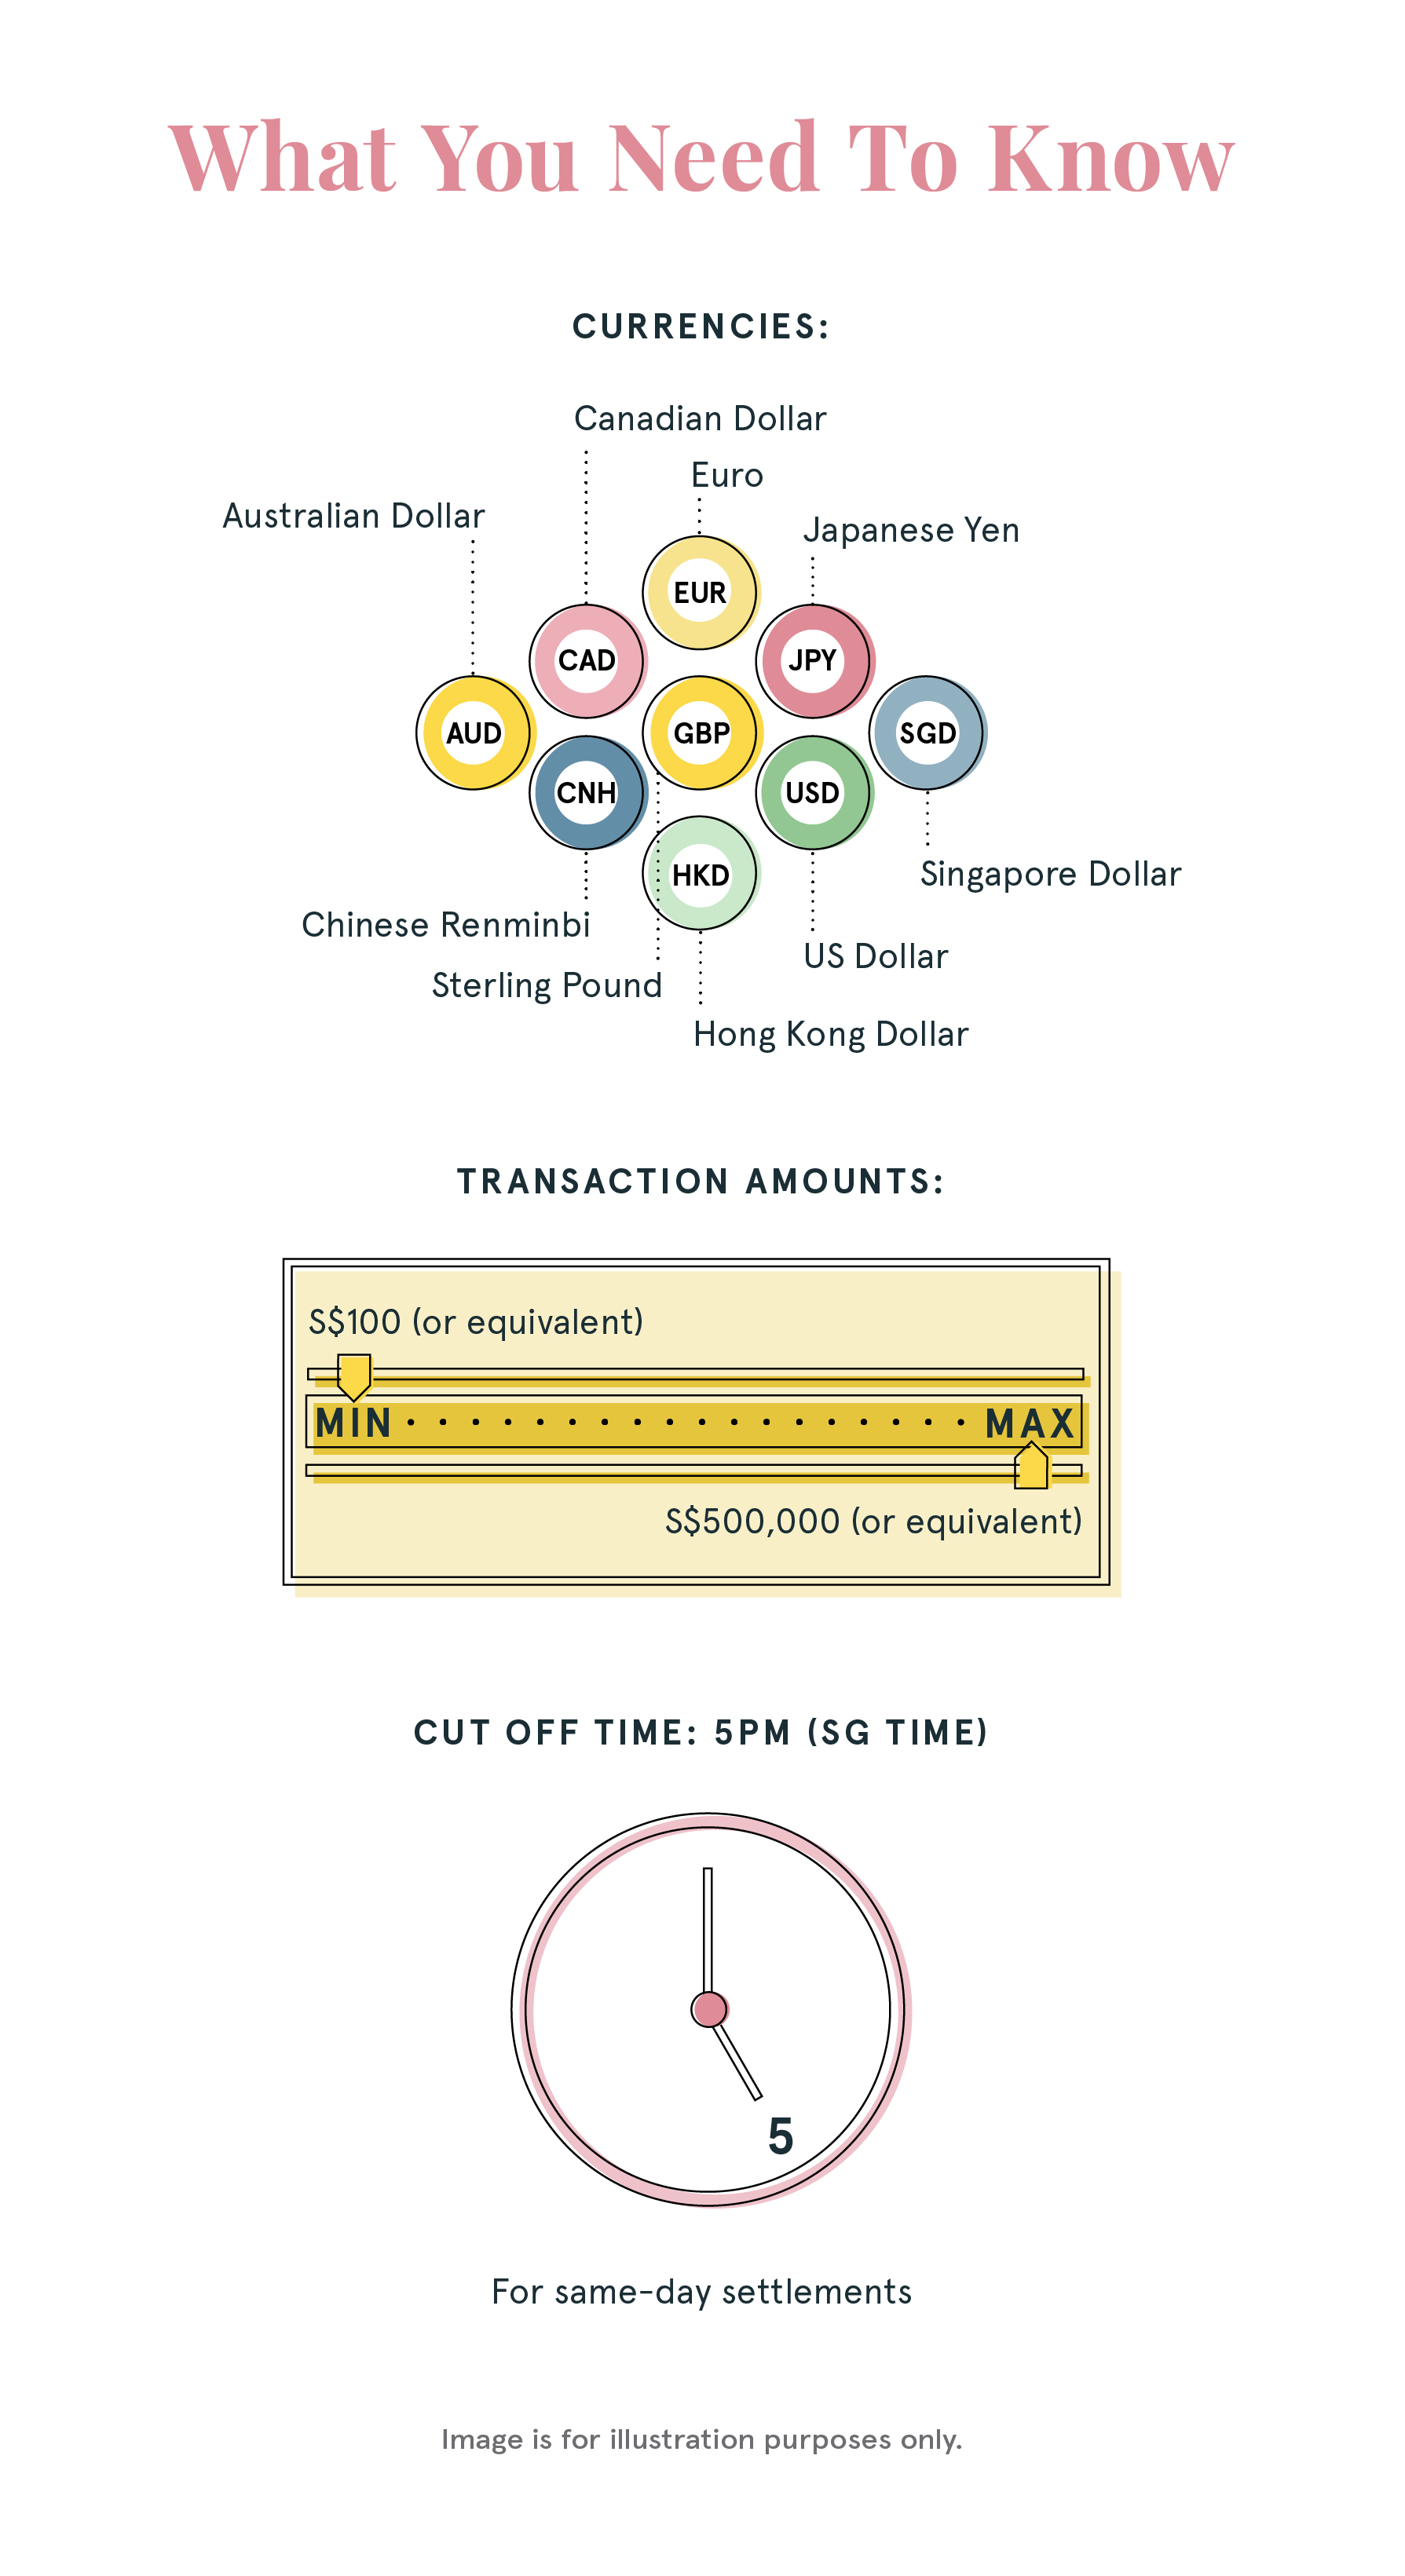 Things to note about the currencies, transaction amounts, and cut-off time